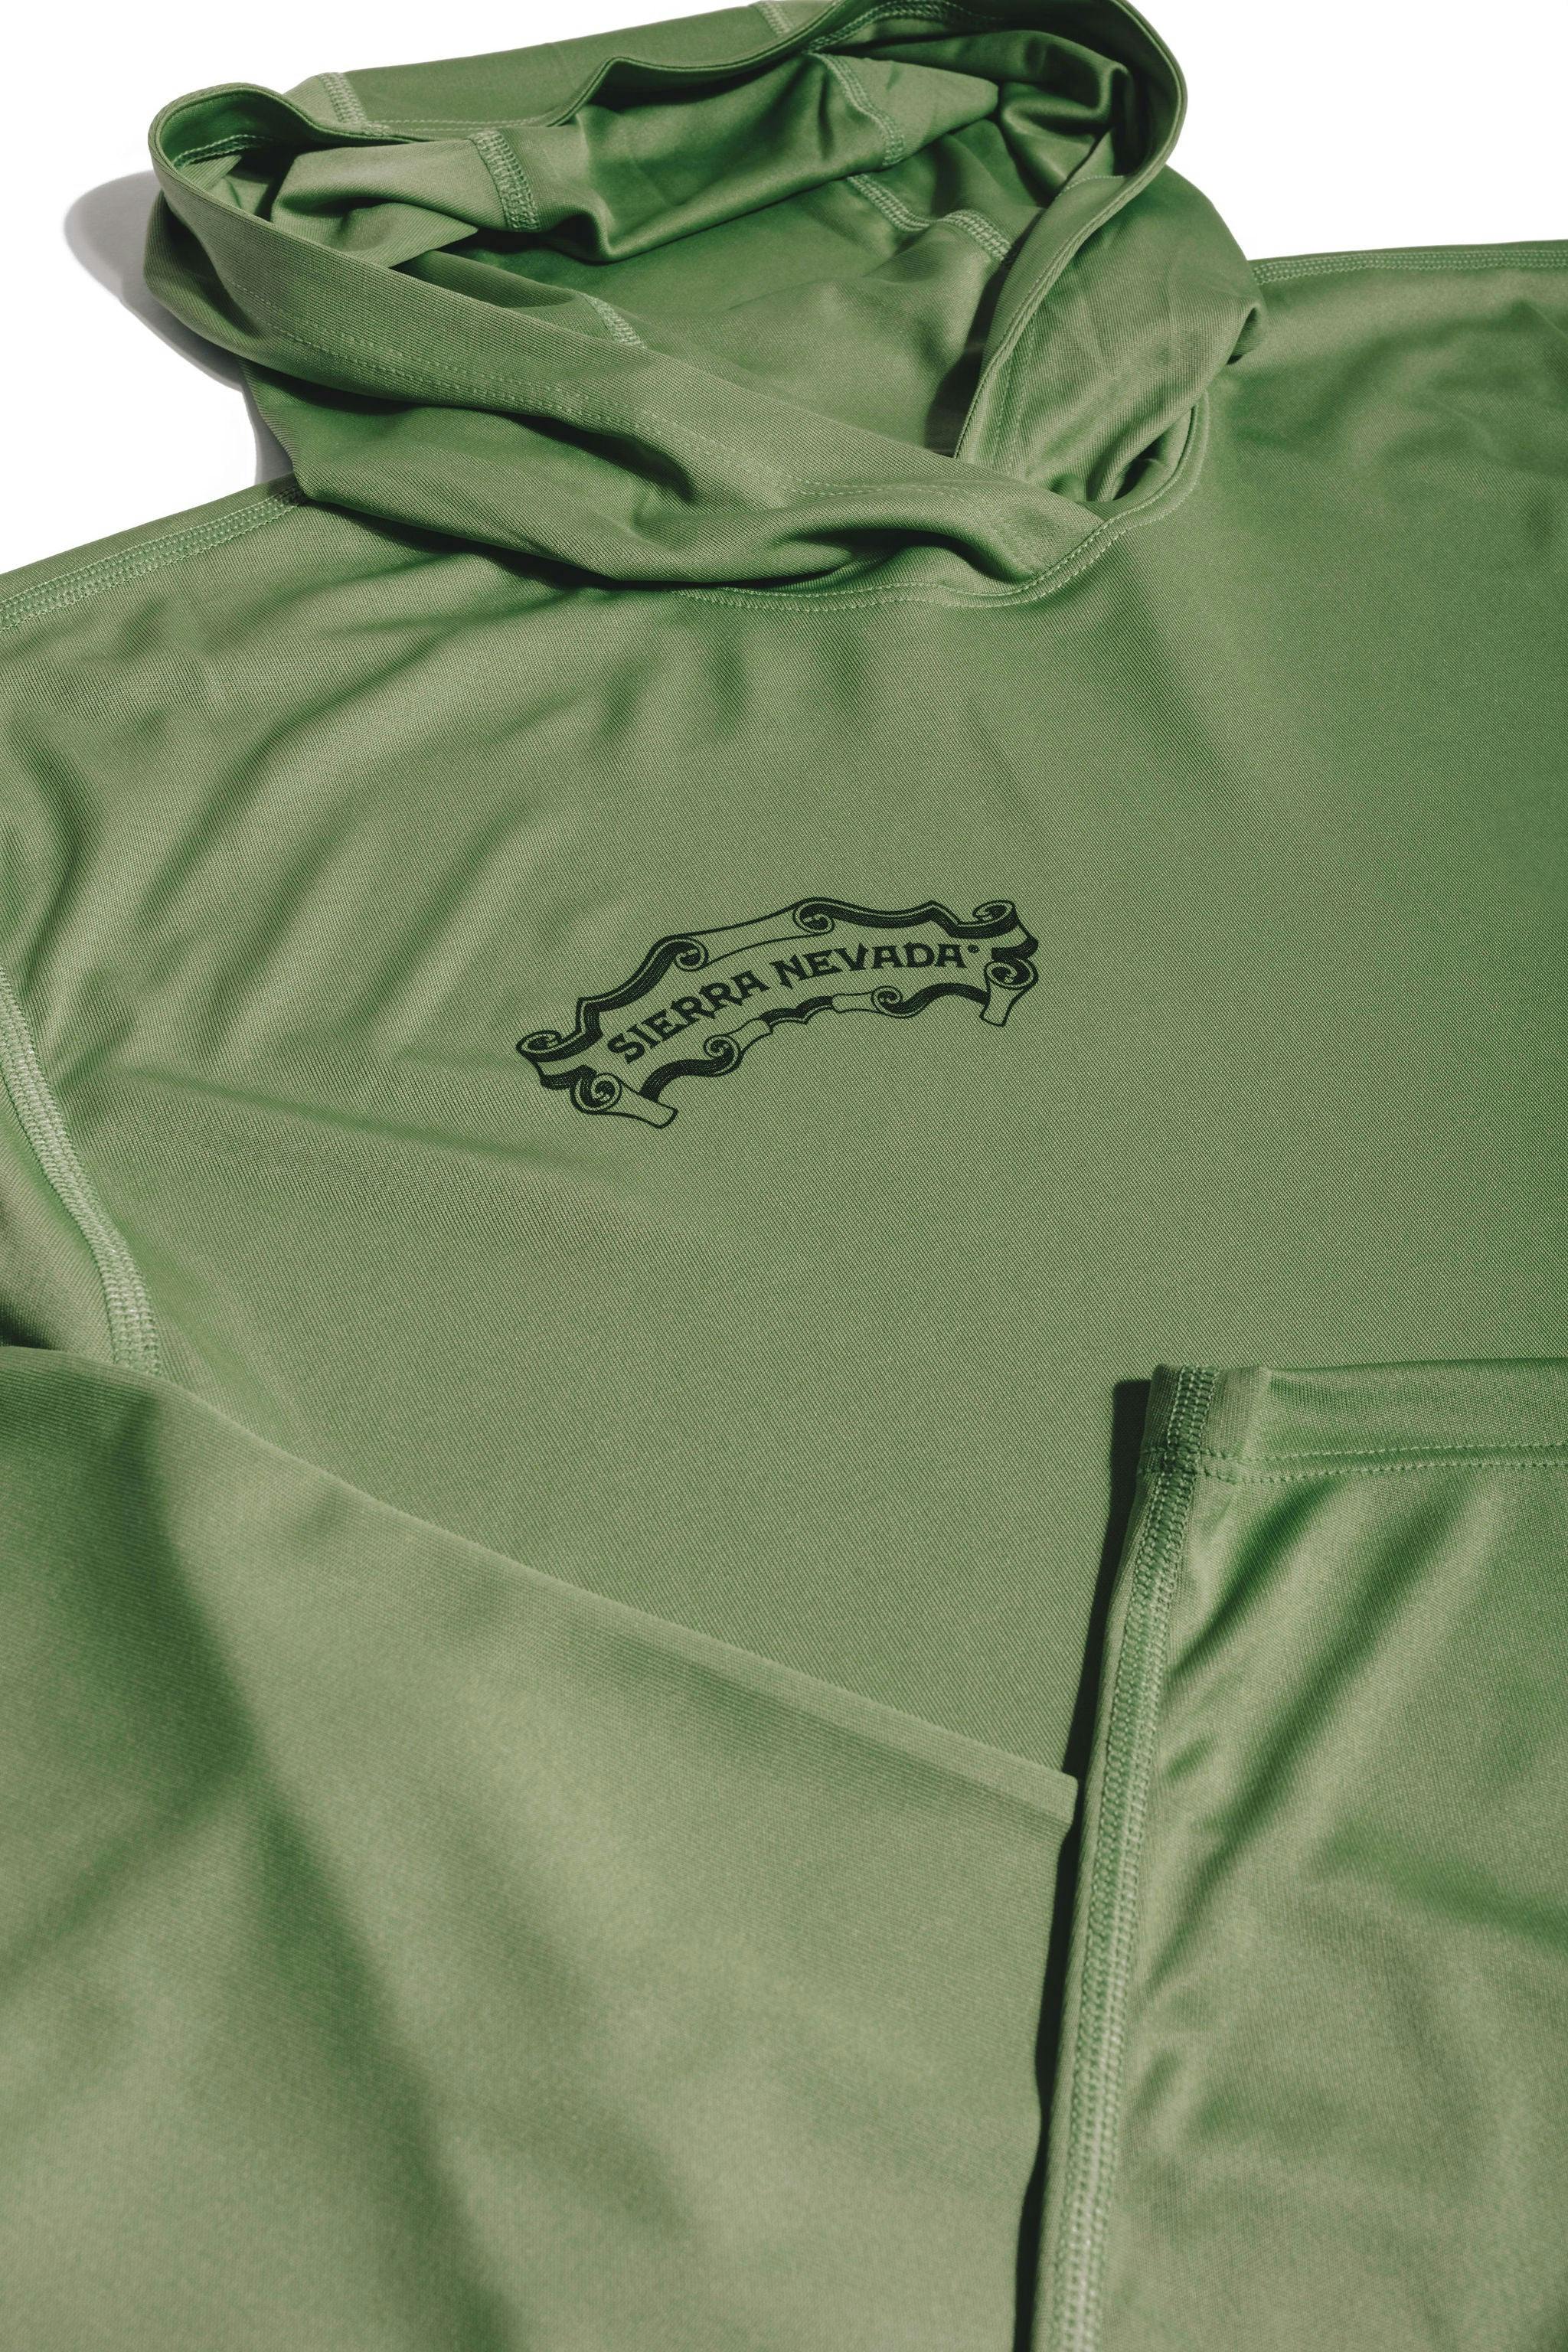 Sierra Nevada Simms Tech Hoodie - detailed view of scroll logo on front chest